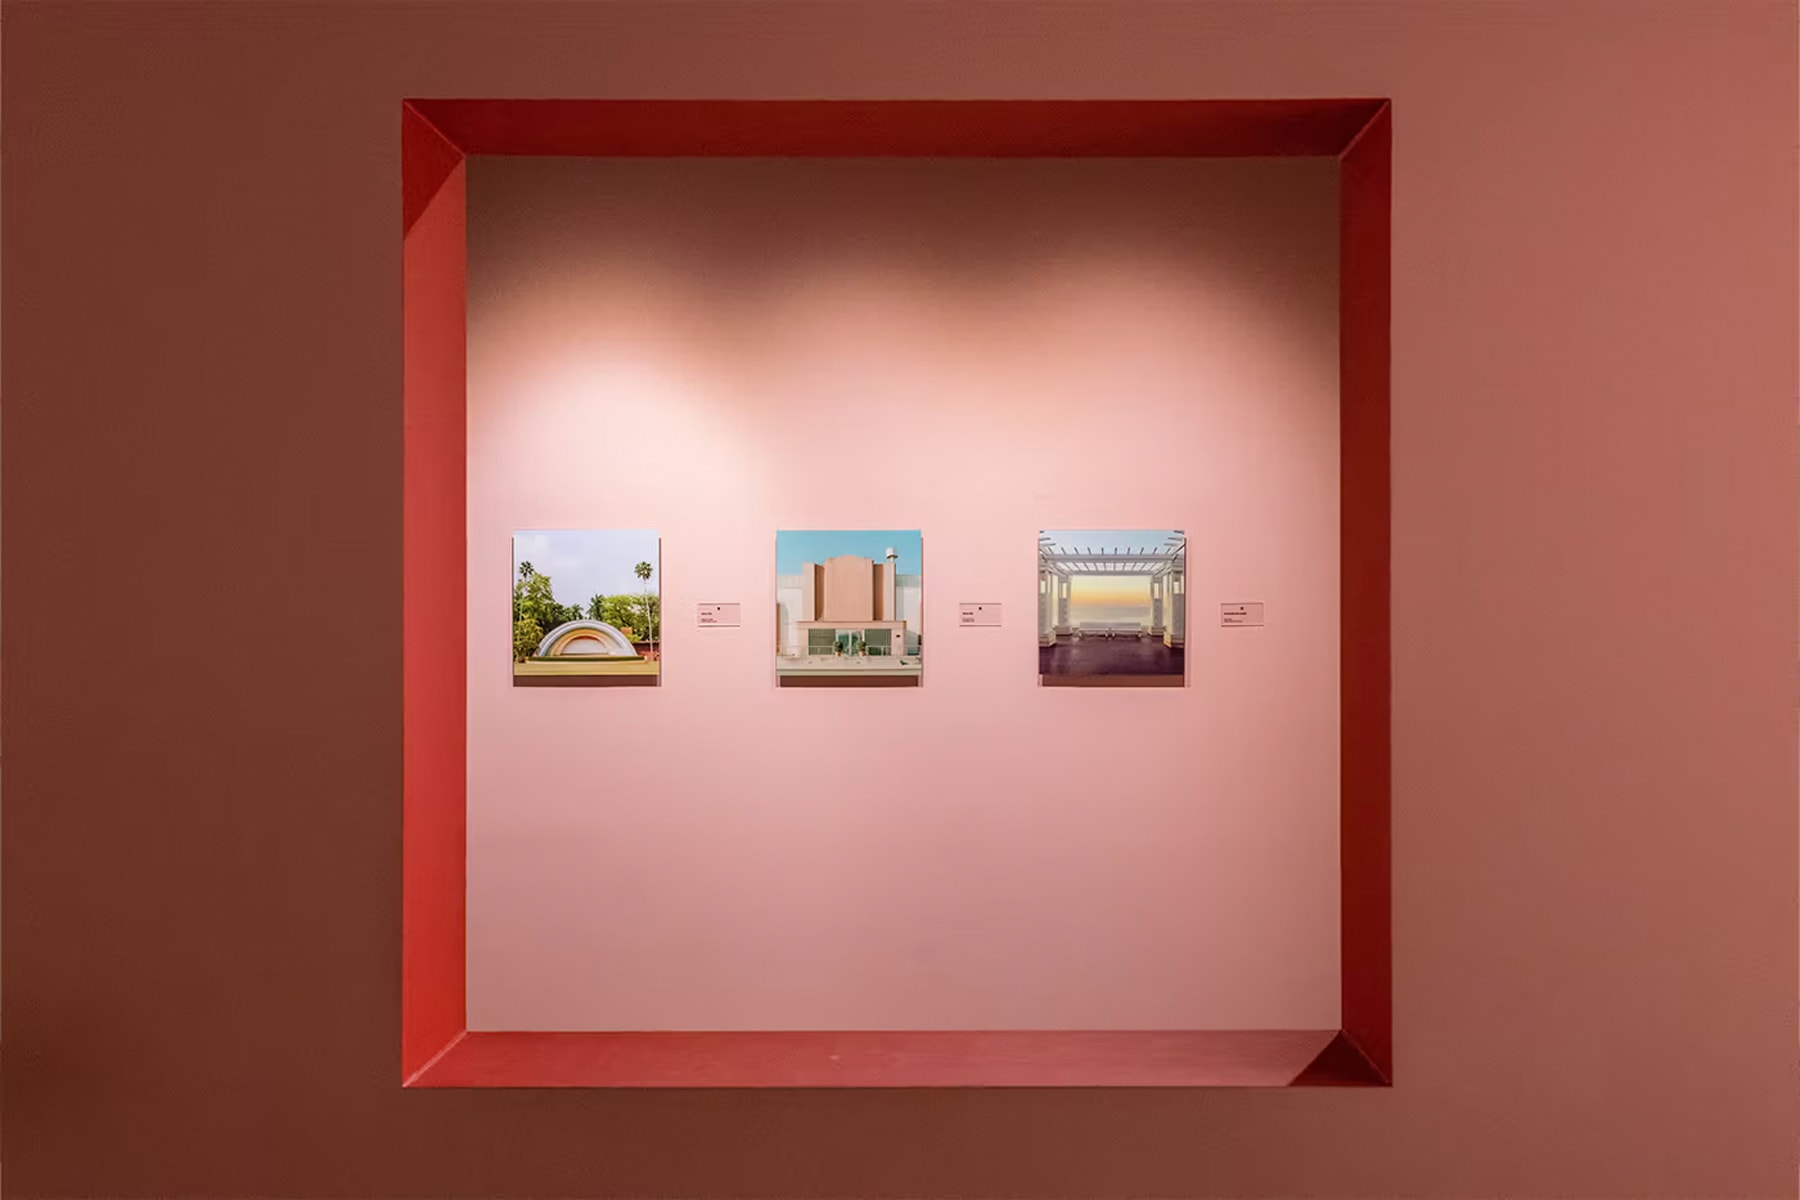 《Accidentally Wes Anderson: The Exhibition》全新展覽即將登陸倫敦